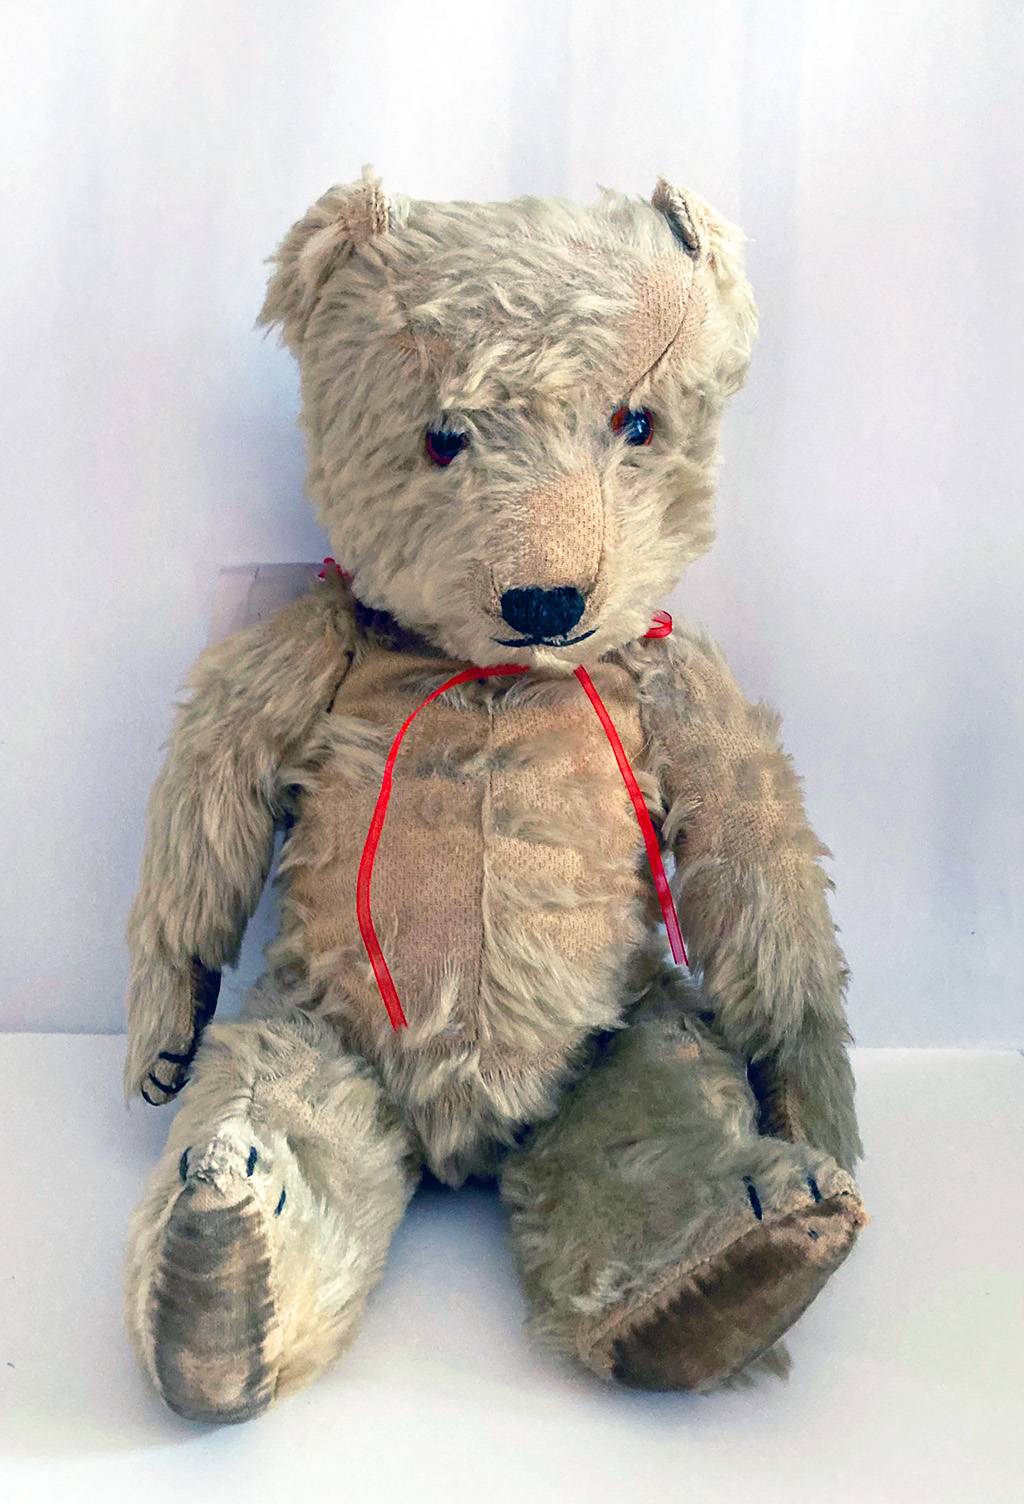 A teddy bear with a red ribbon.